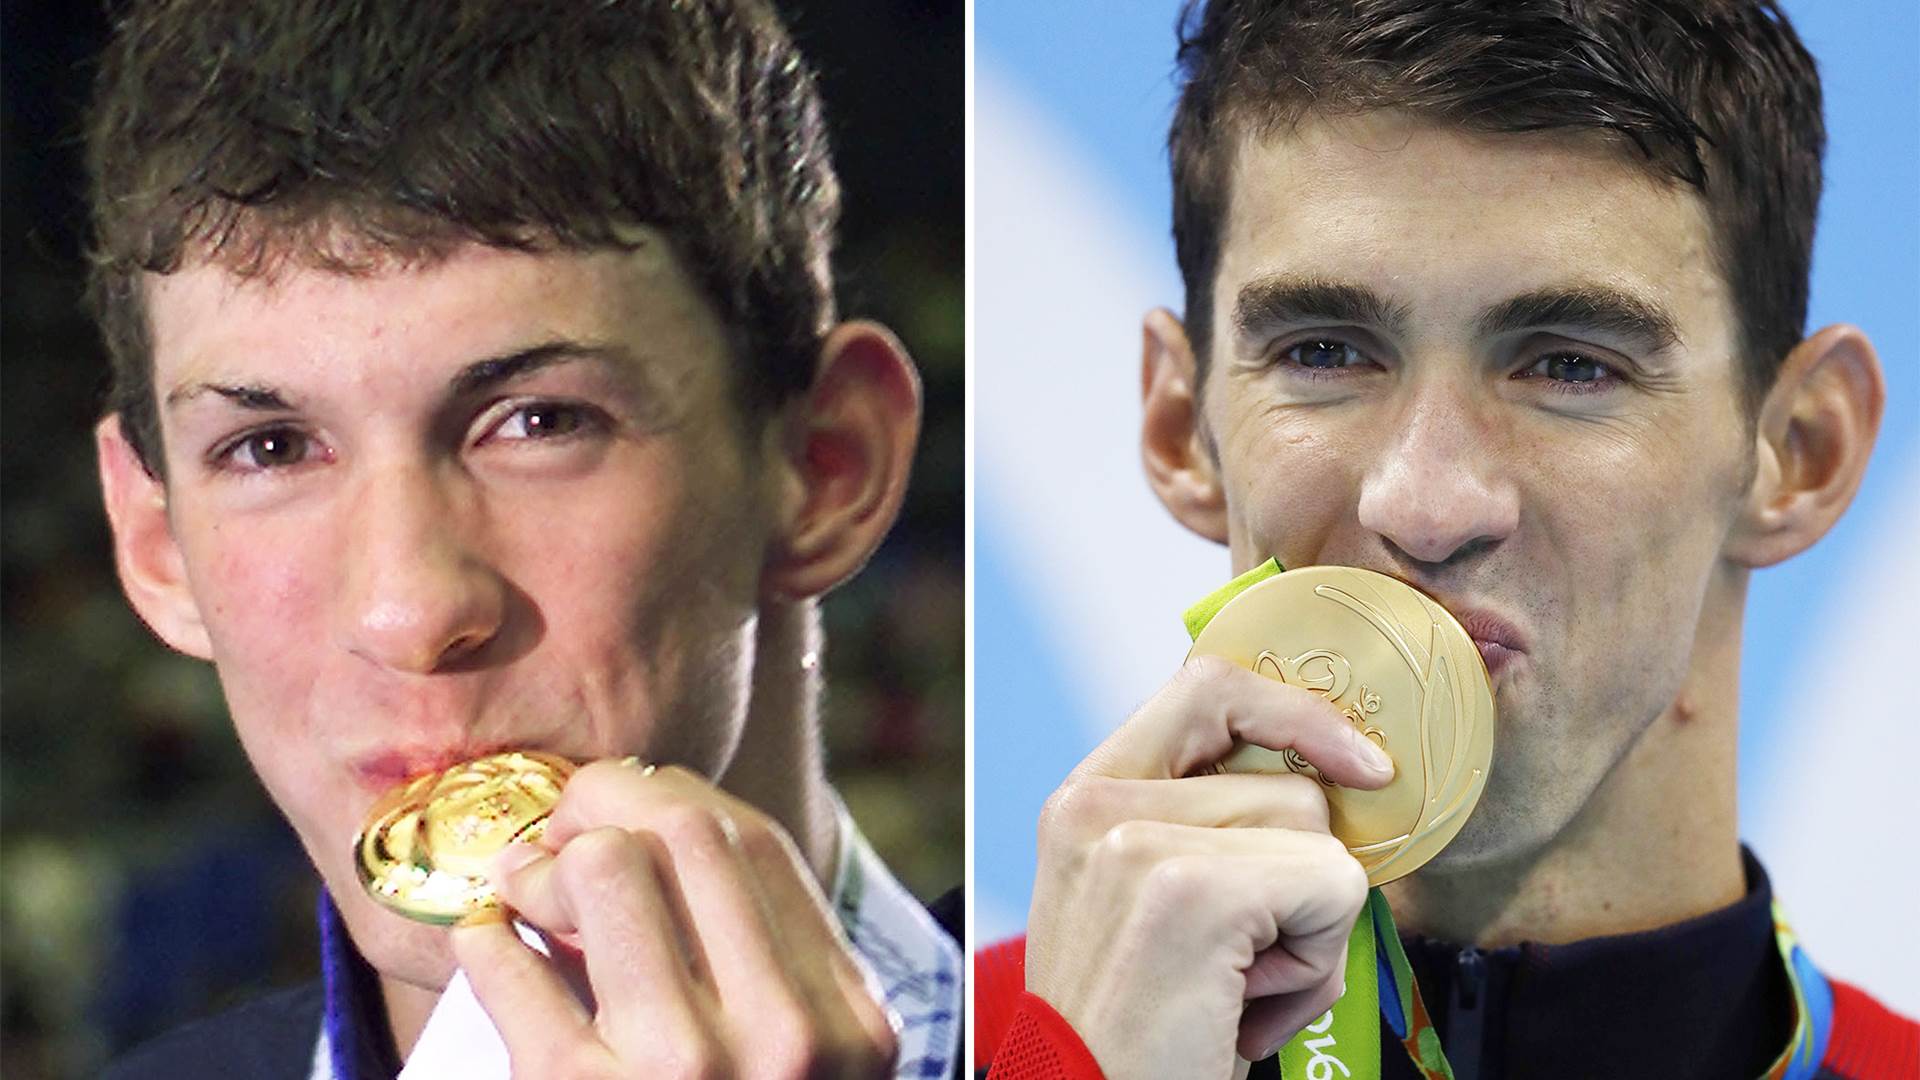 before-after-olympians-toda-160811-tease-phelps-01_fb78a74158f045718b5ba188886f95d2.today-ss-slide-desktop